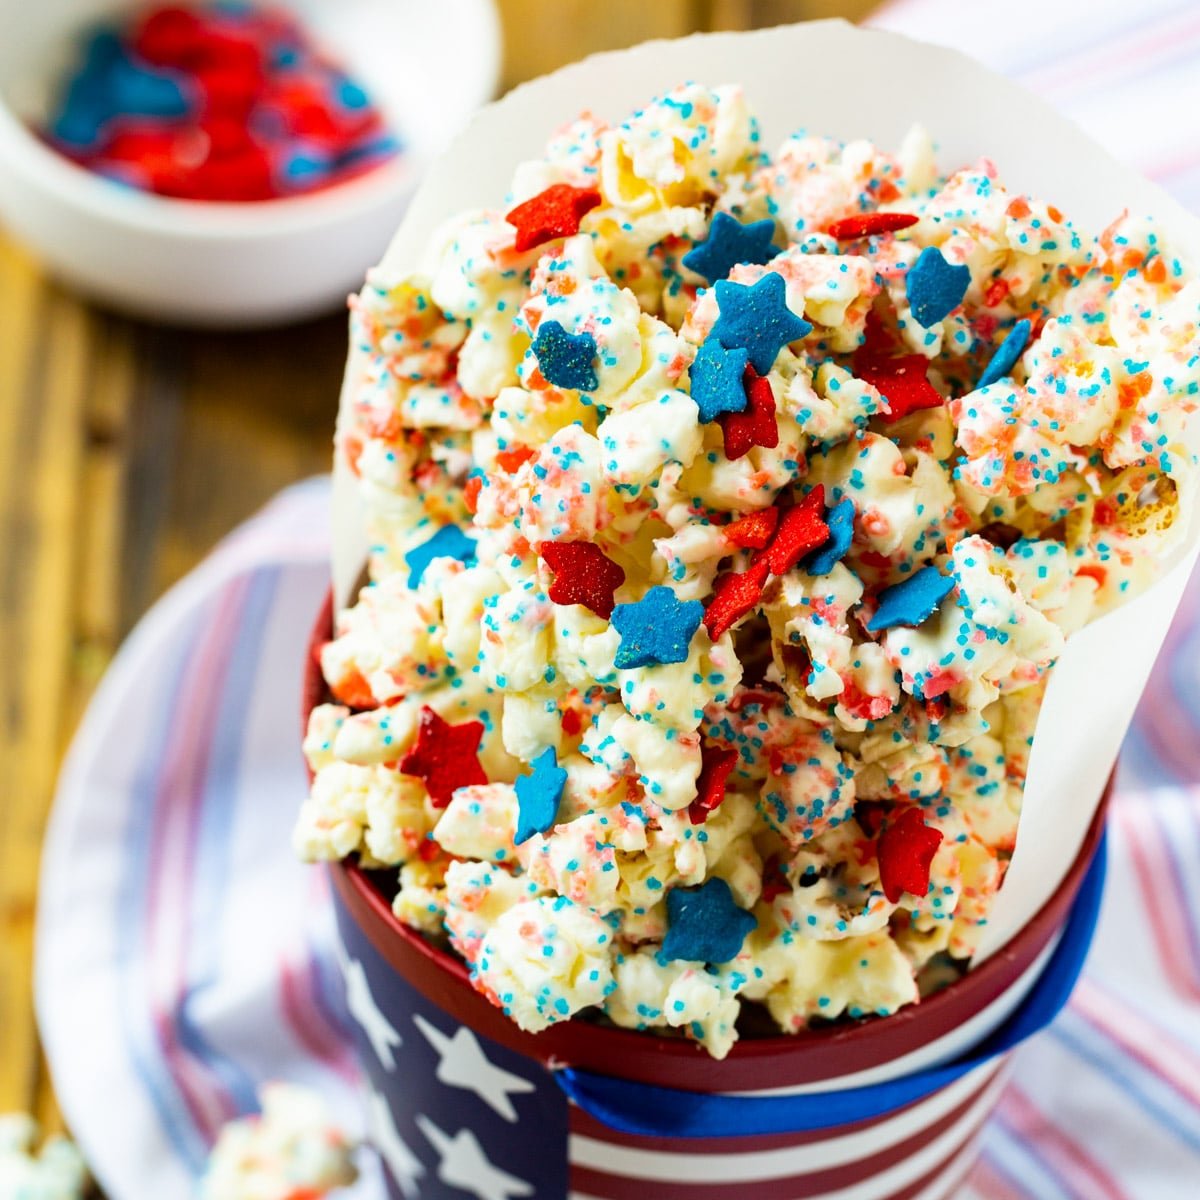 Firecracker Porcorn in a decorative 4th of July cup.